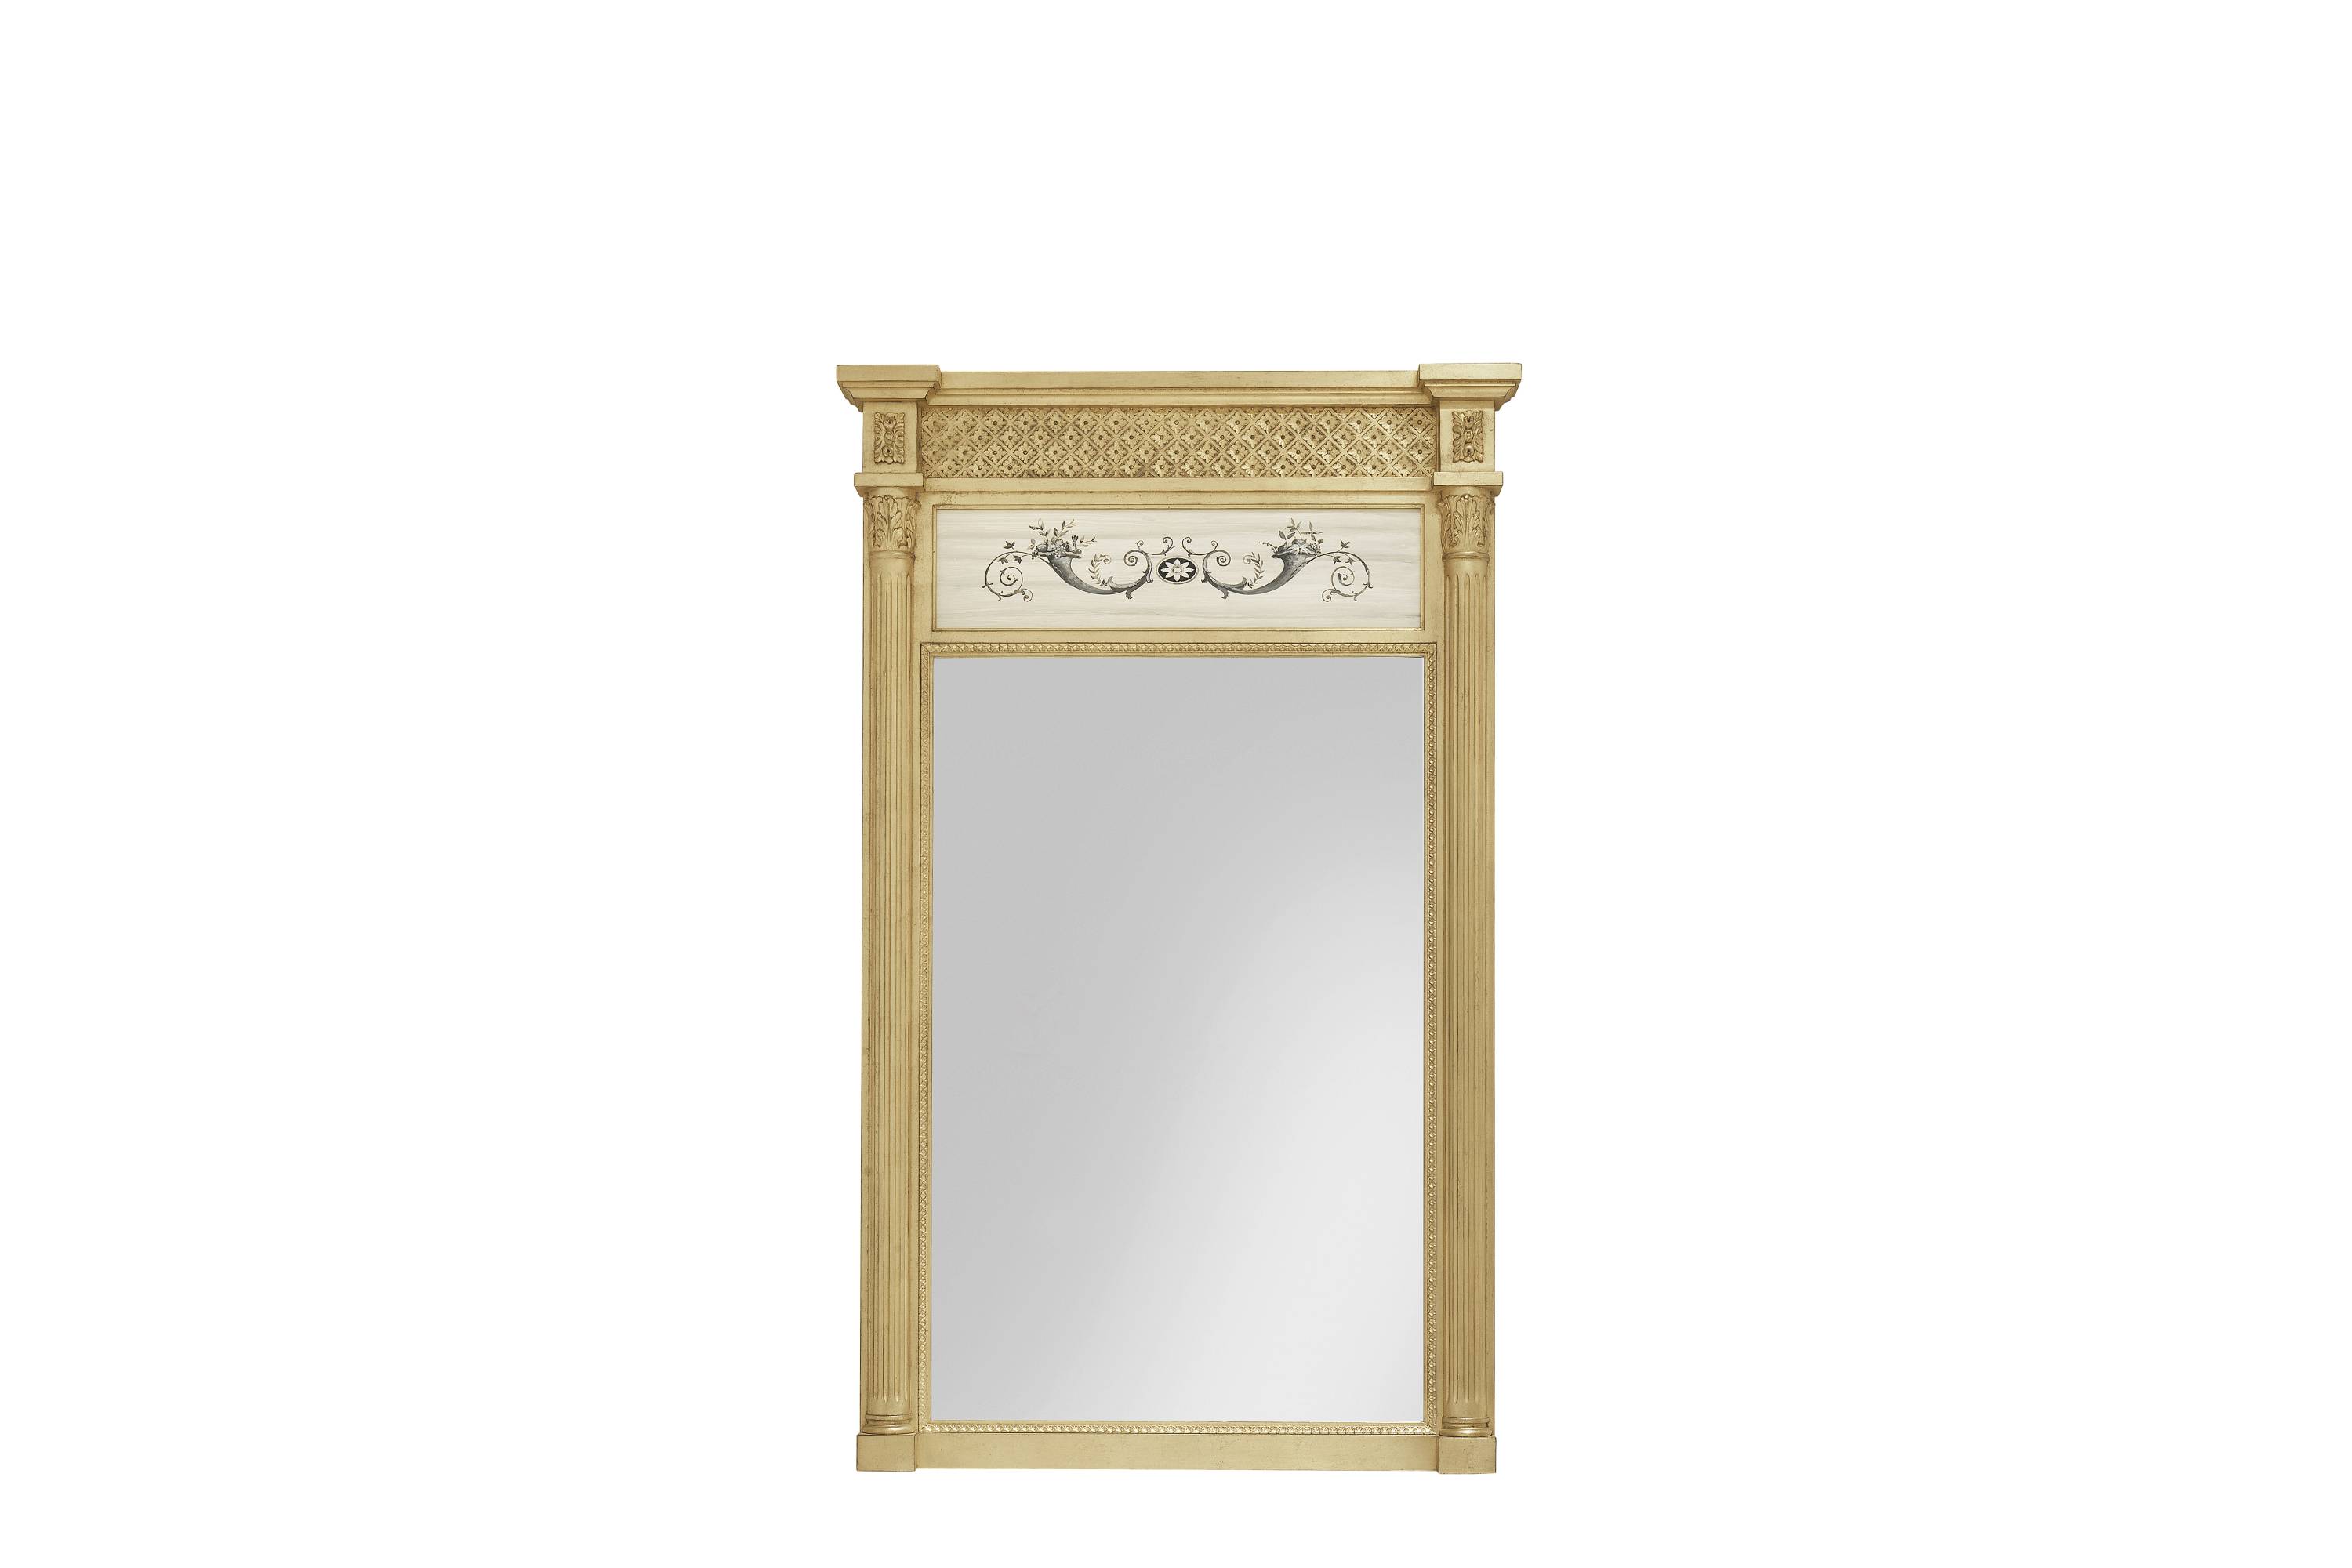 REFLET mirror - Bespoke projects with luxury Made in Italy classic furniture